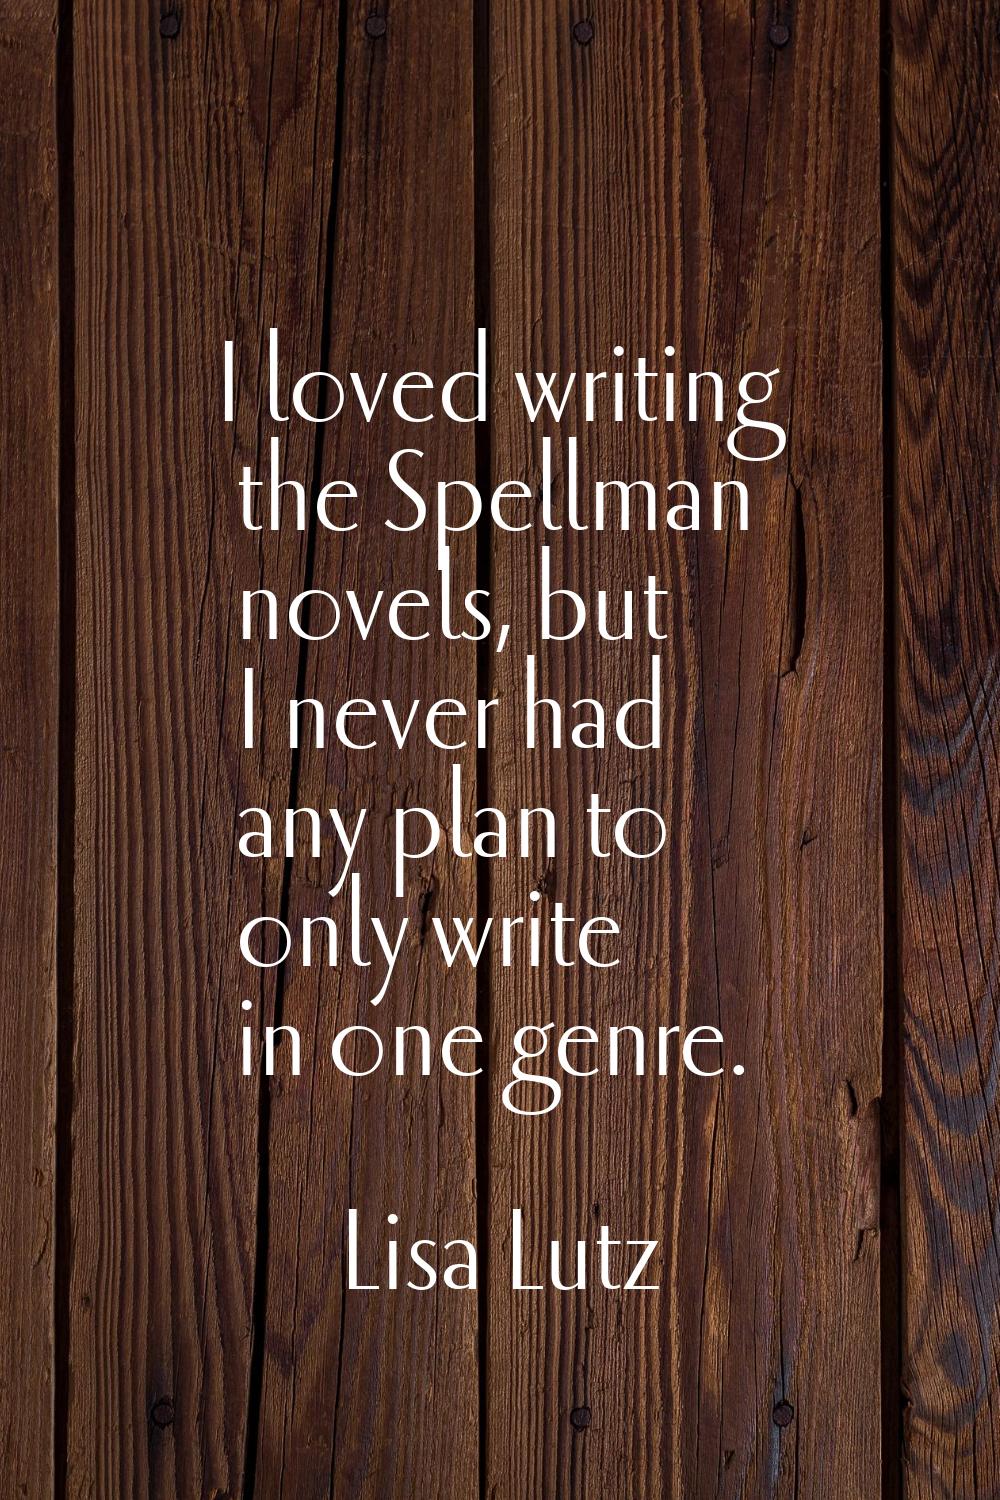 I loved writing the Spellman novels, but I never had any plan to only write in one genre.